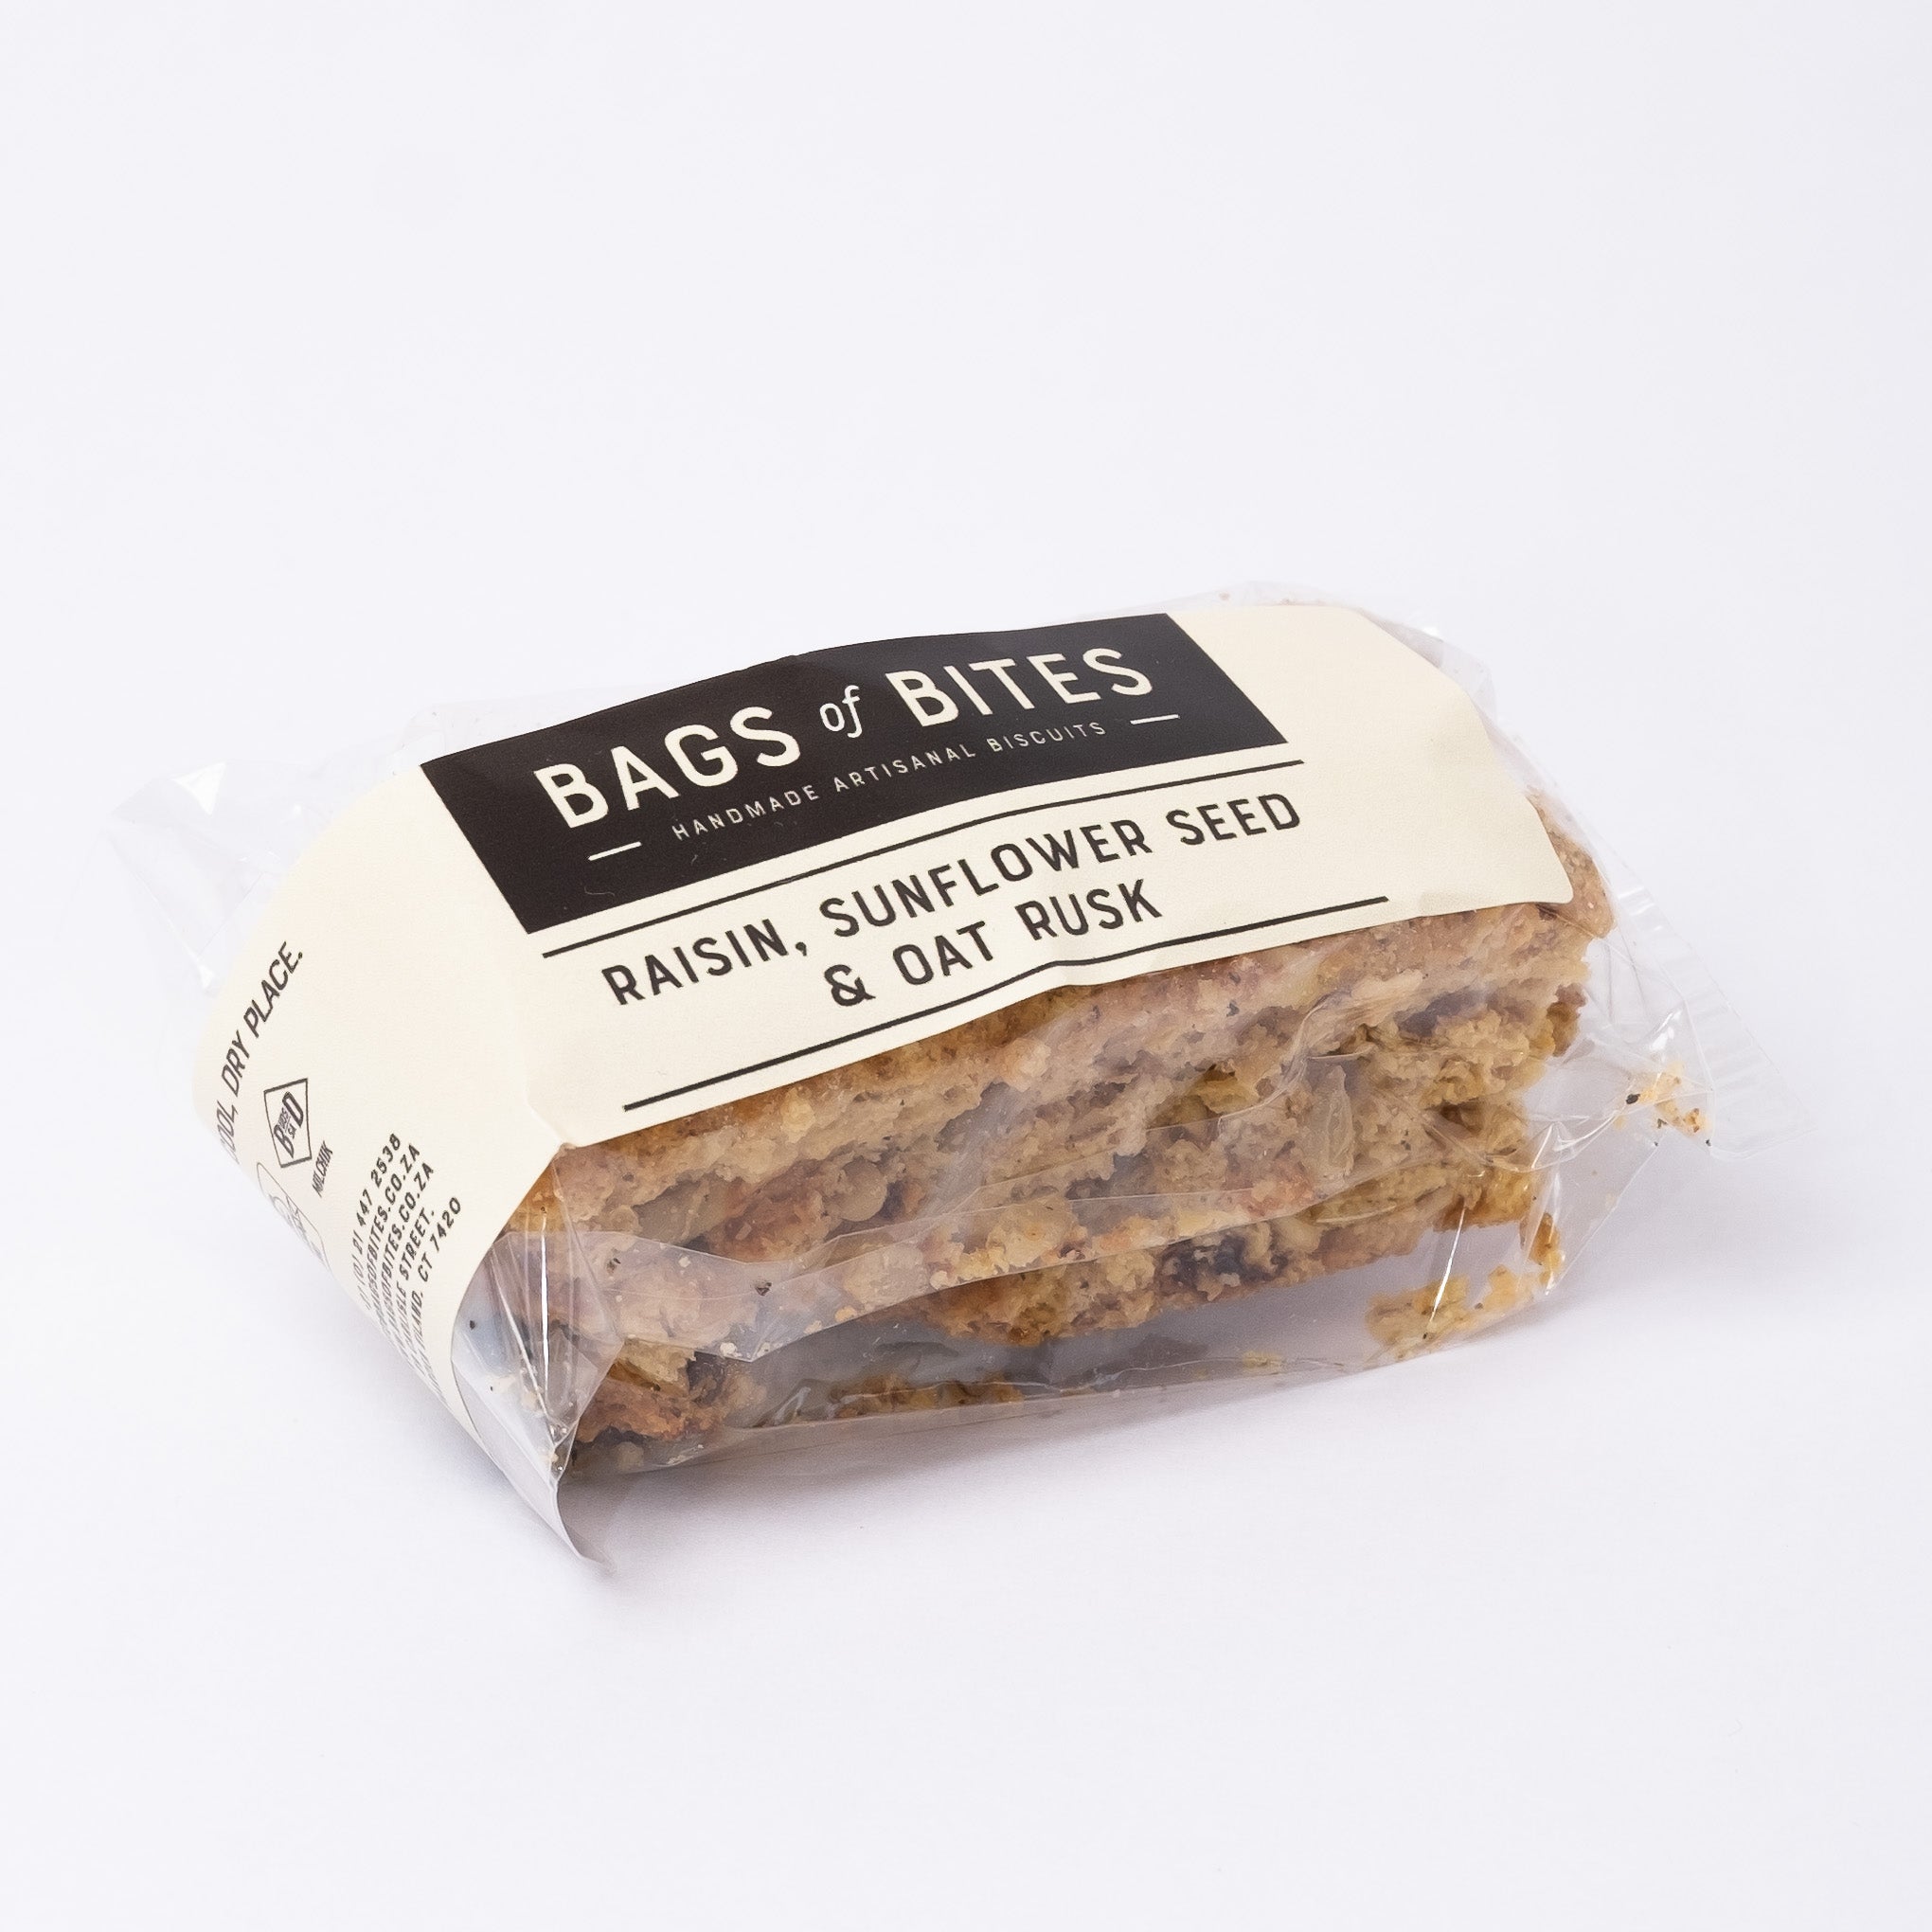 Raisin, Sunflower Seed & Oat Rusks - Individually Wrapped